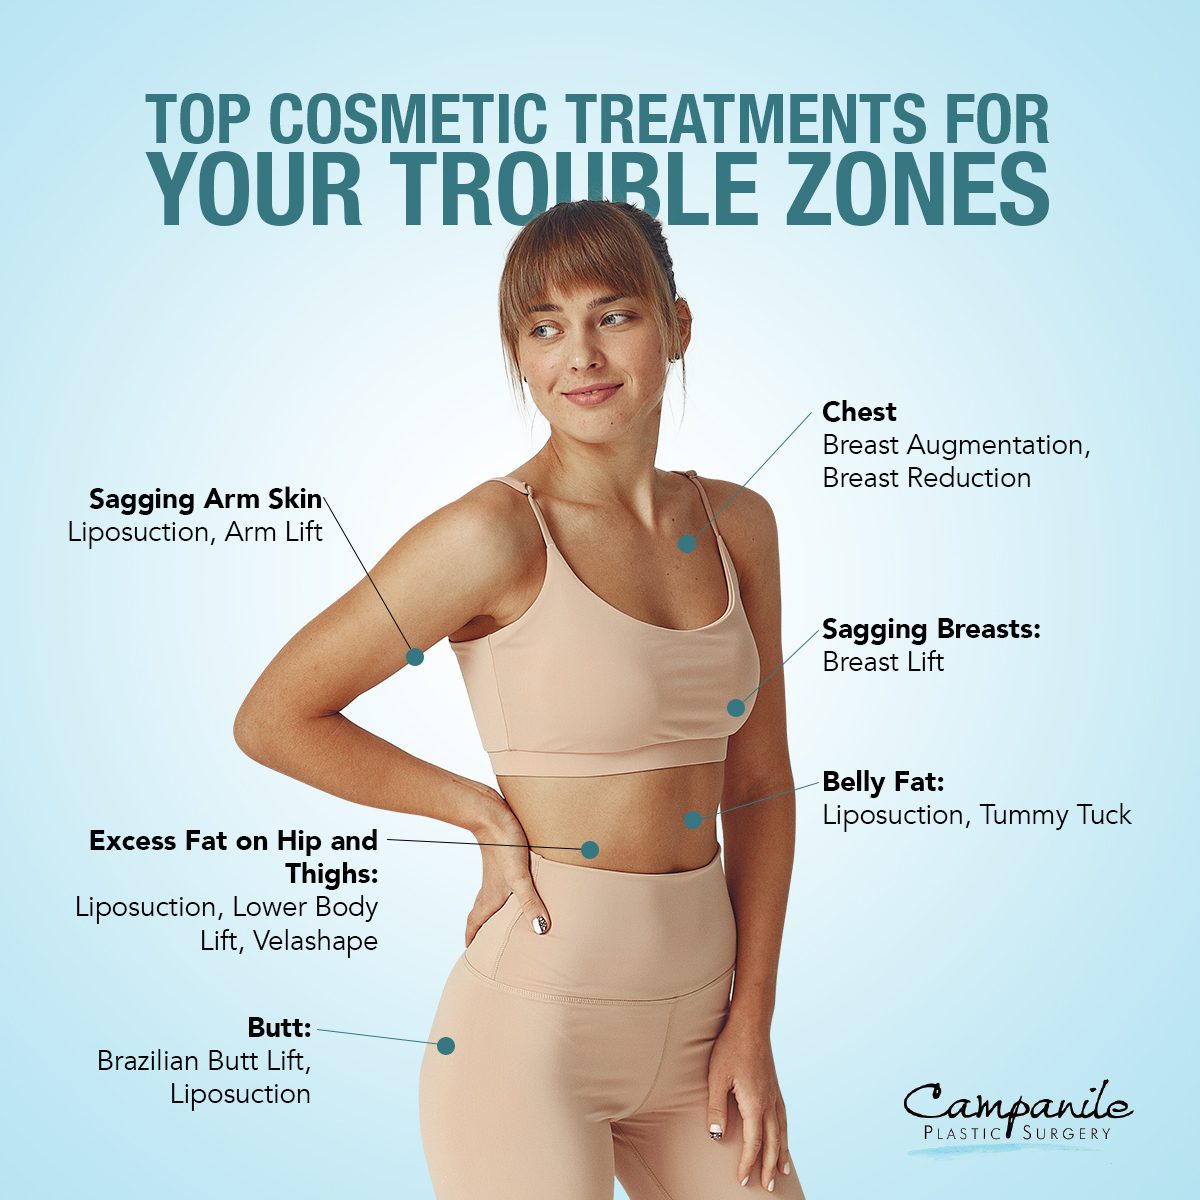 Top Cosmetic Treatments for Your Trouble Zones